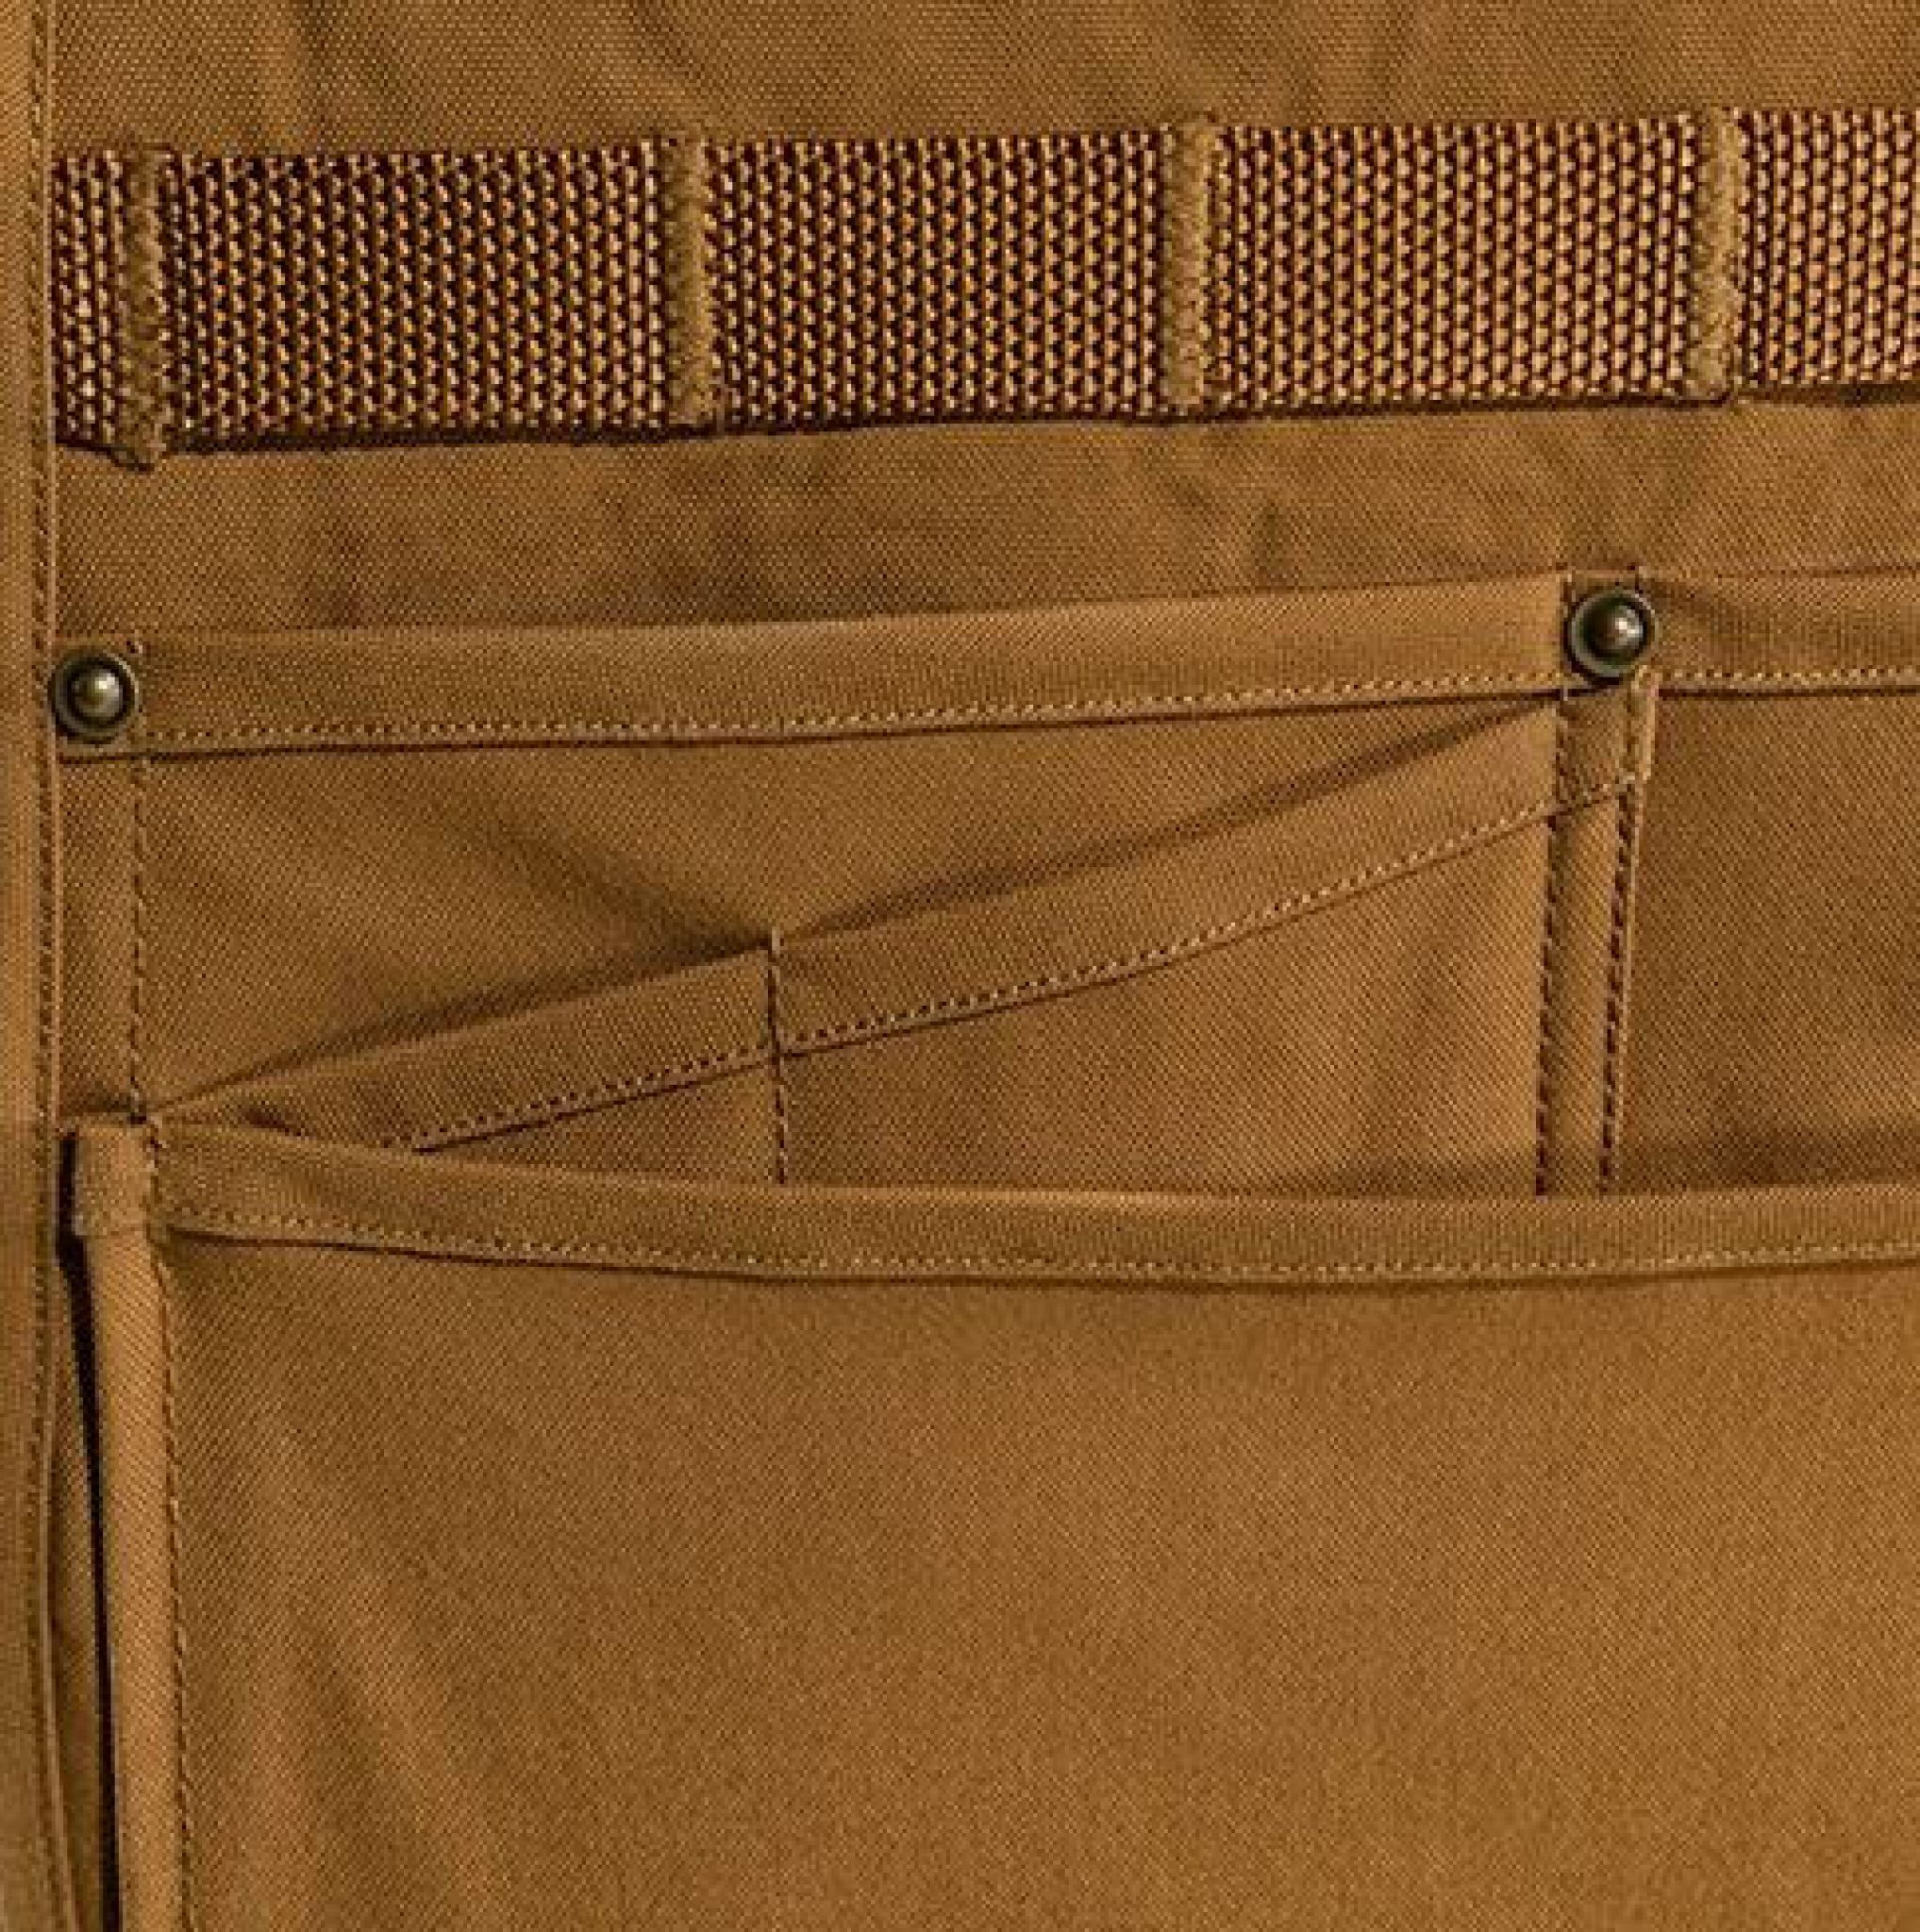 Carhartt Back Seat Organizer is Made of Rugged Fabric, Offers Plenty of ...